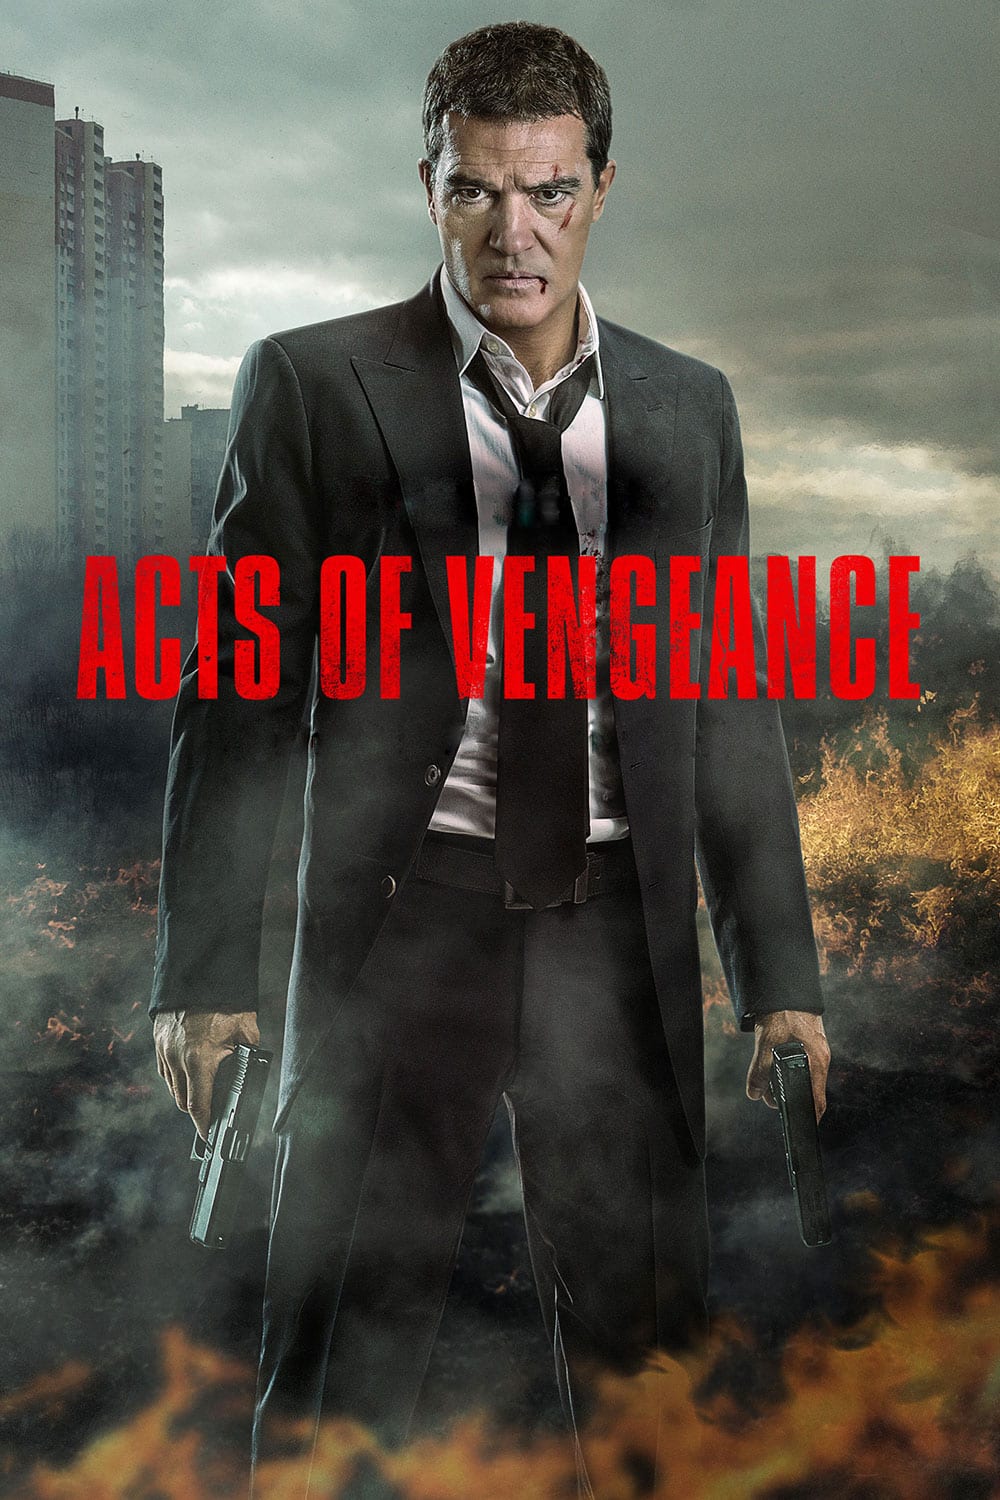 is acts of vengeance a true story